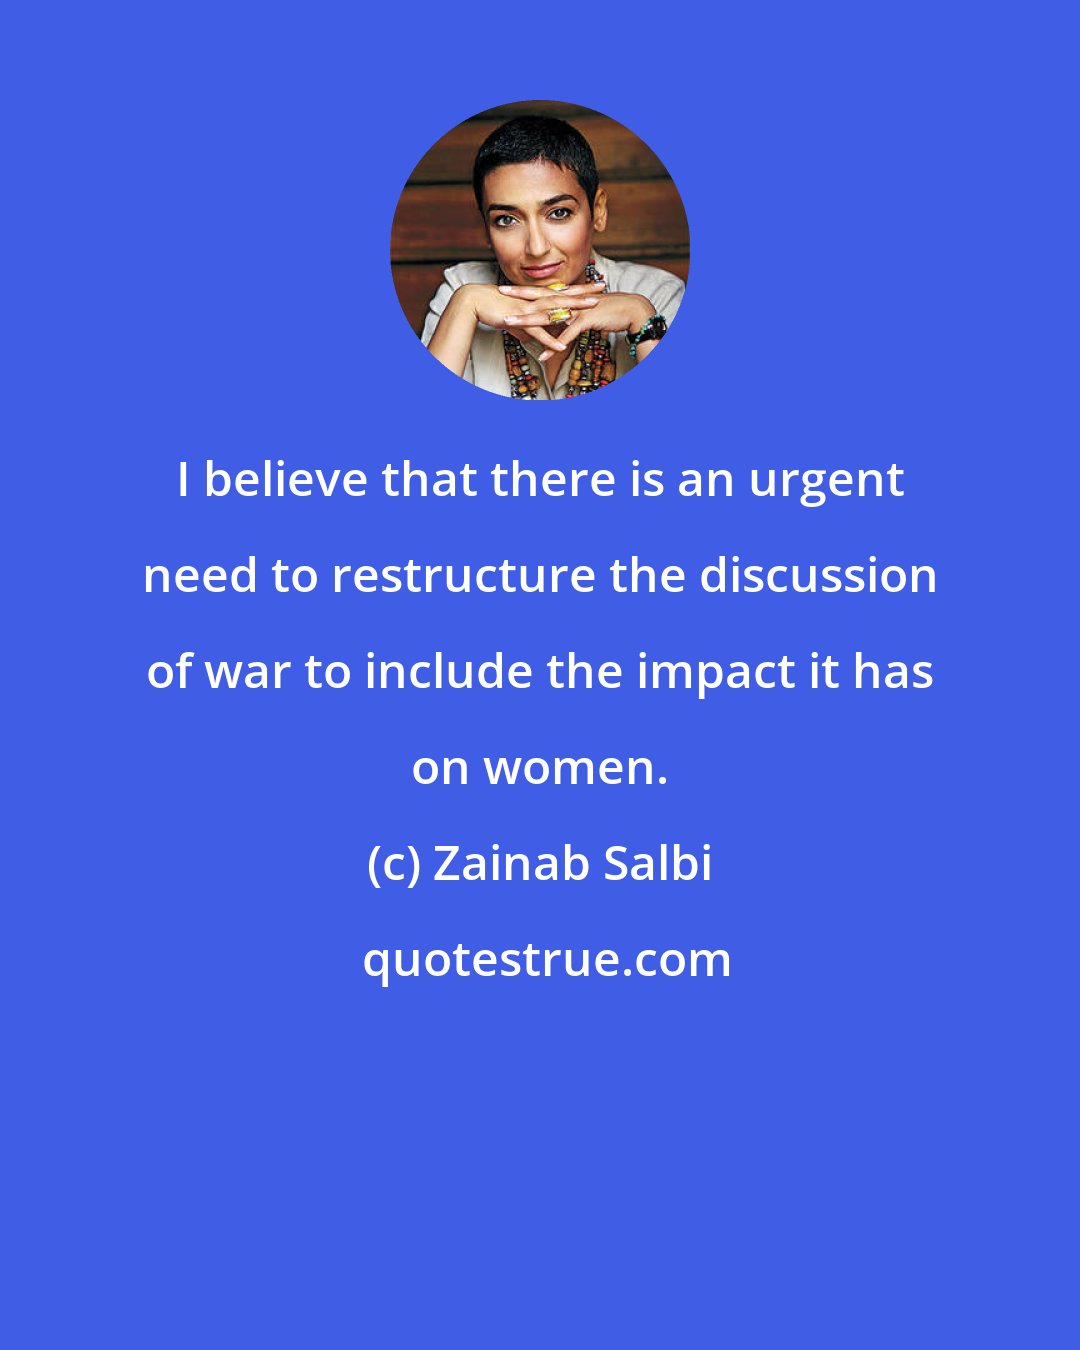 Zainab Salbi: I believe that there is an urgent need to restructure the discussion of war to include the impact it has on women.